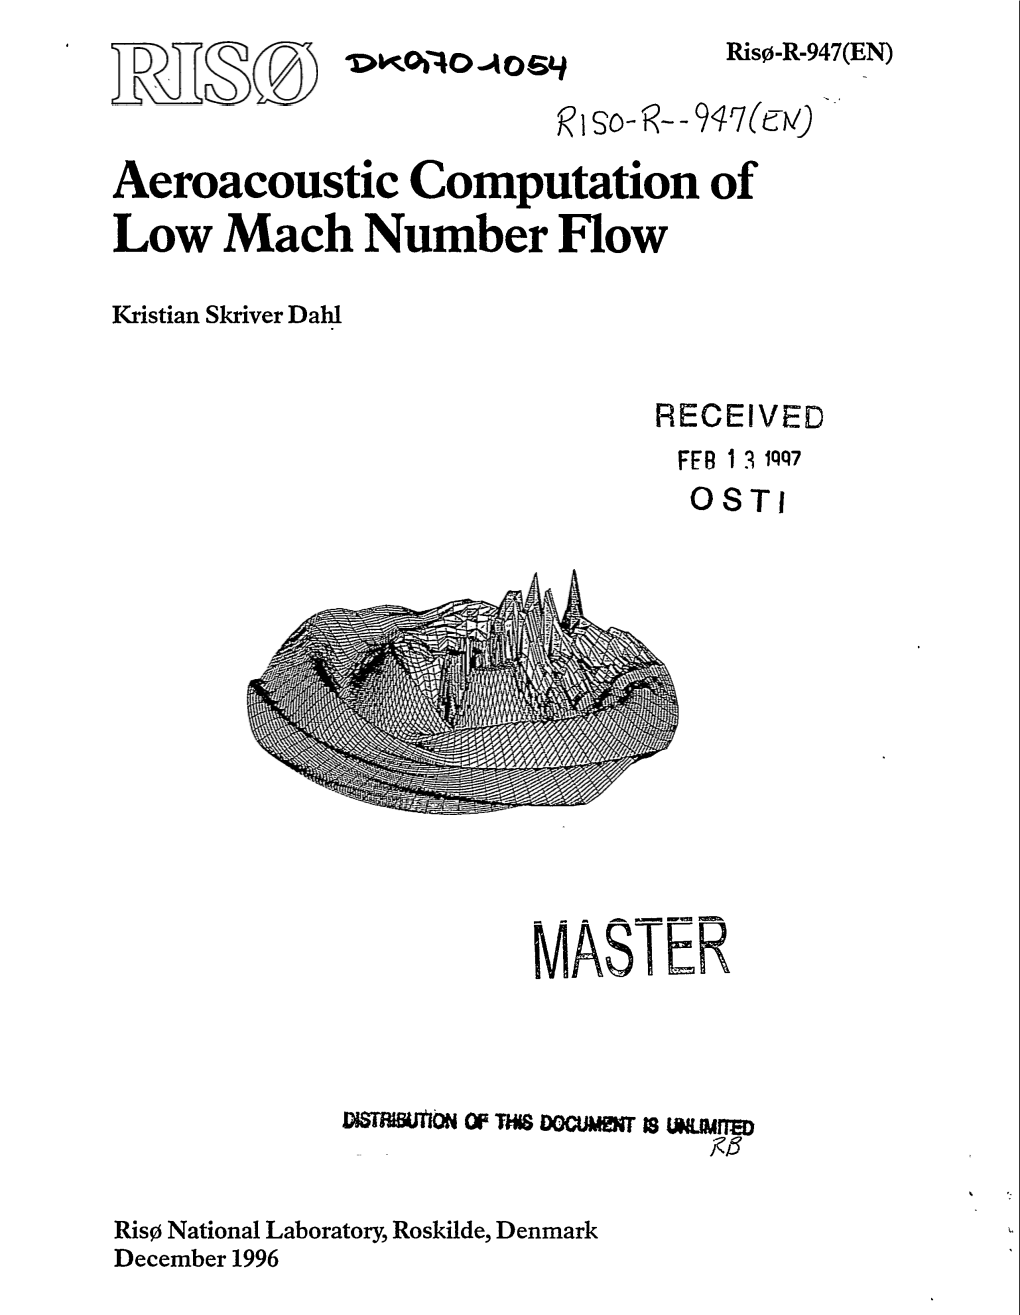 Aeroacoustic Computation of Low Mach Number Flow